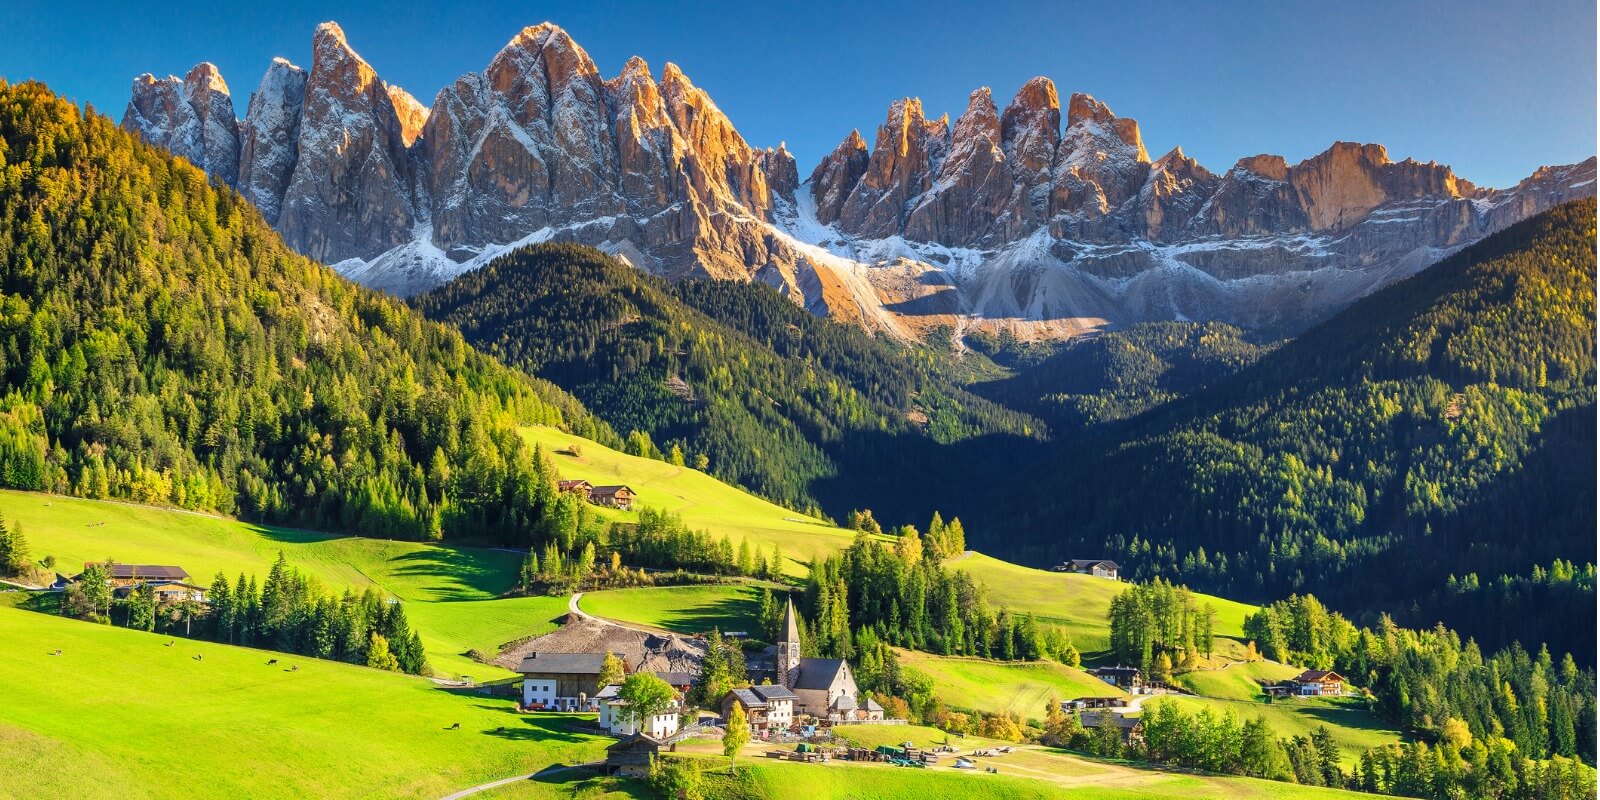 Santa Maddalena village with magical Dolomites mountains in background, Val di Funes valley, Trentino Alto Adige region, Italy, Europe 